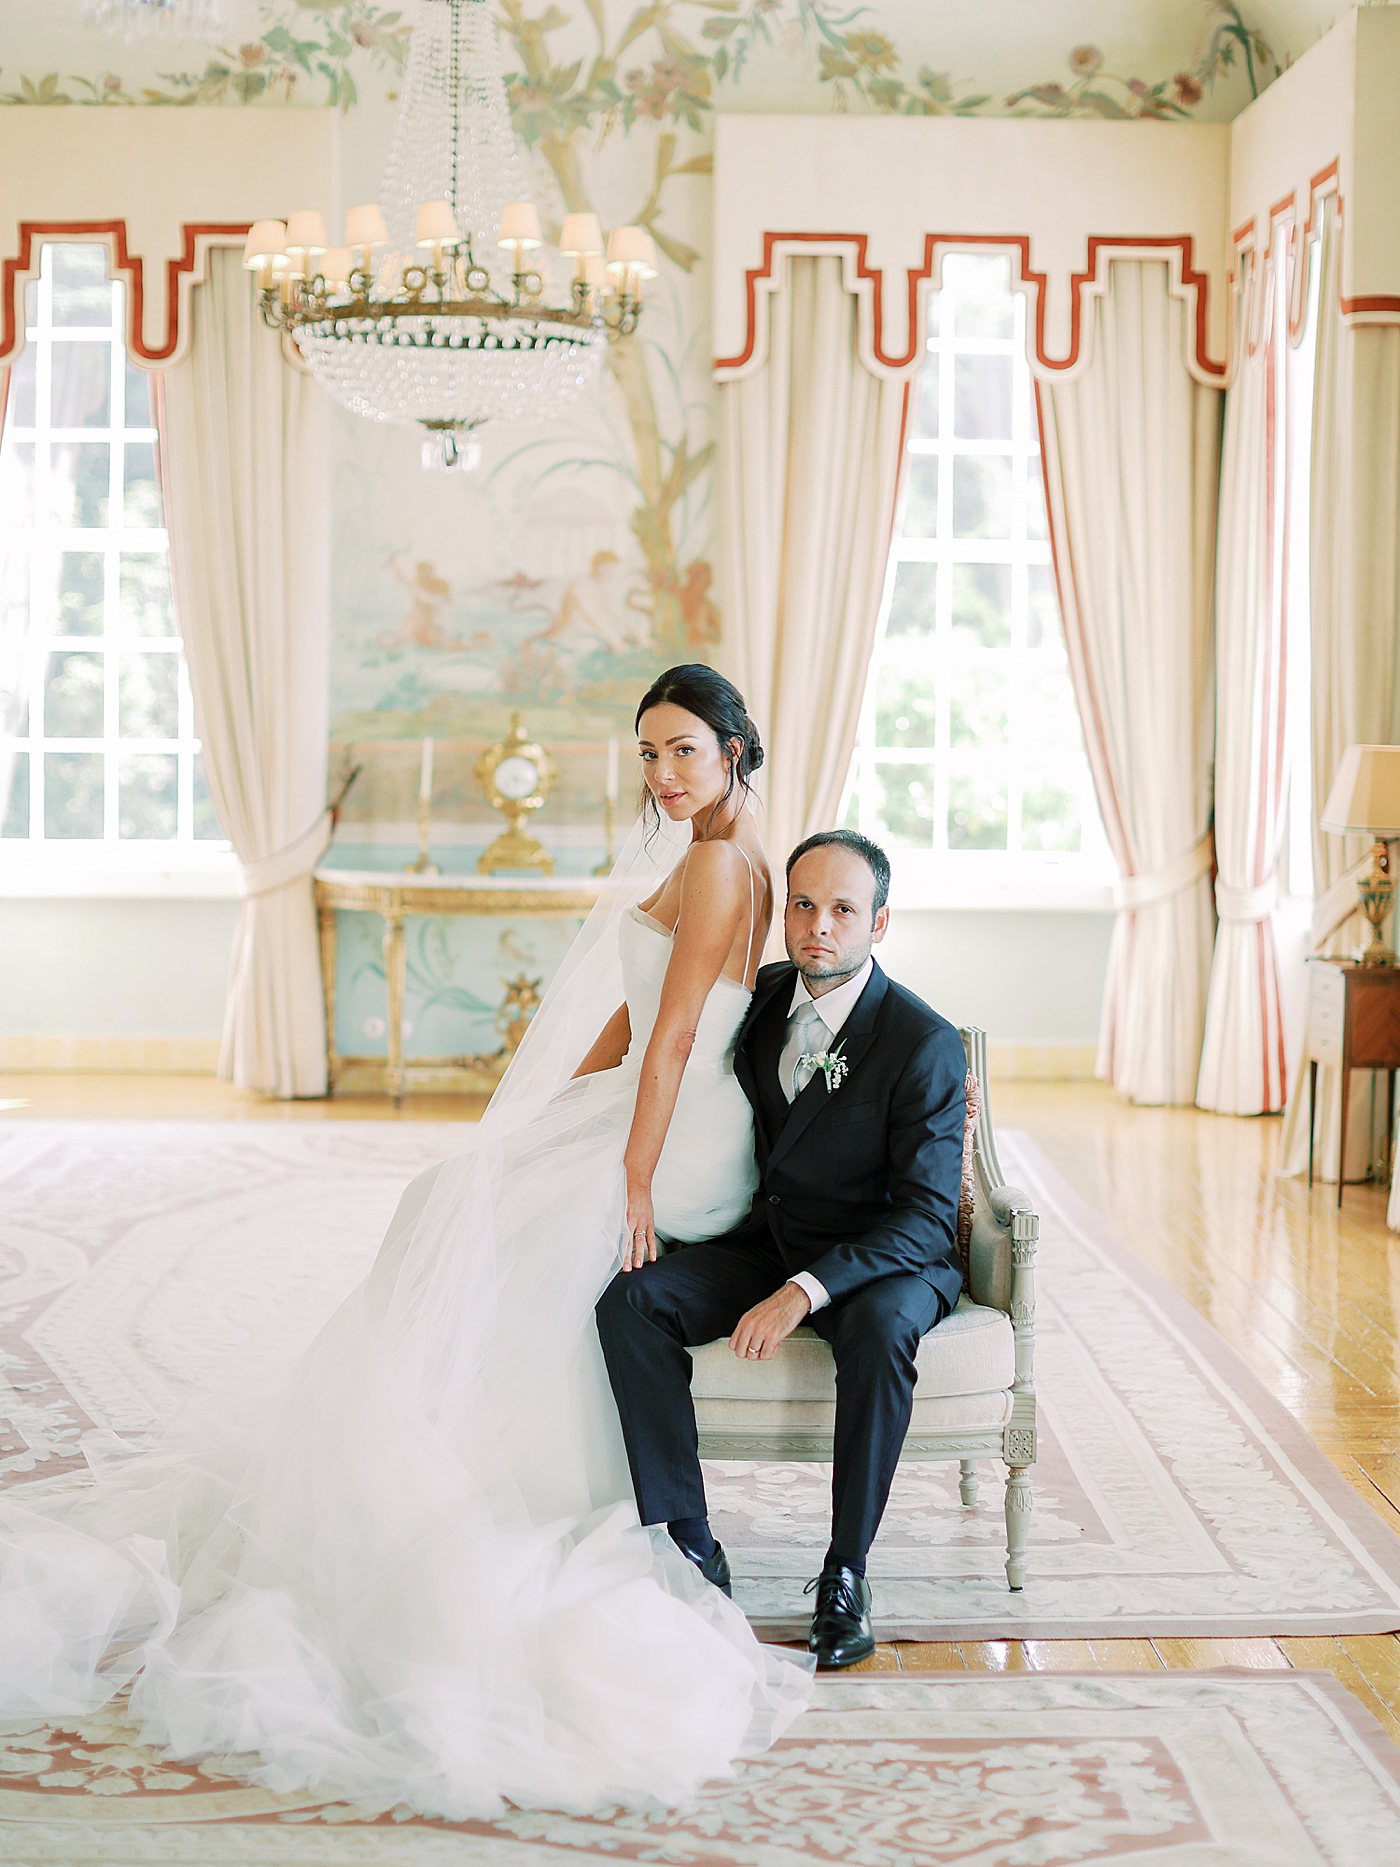 Bride and groom sitting on a chair | Image by Diane Sotero Photography